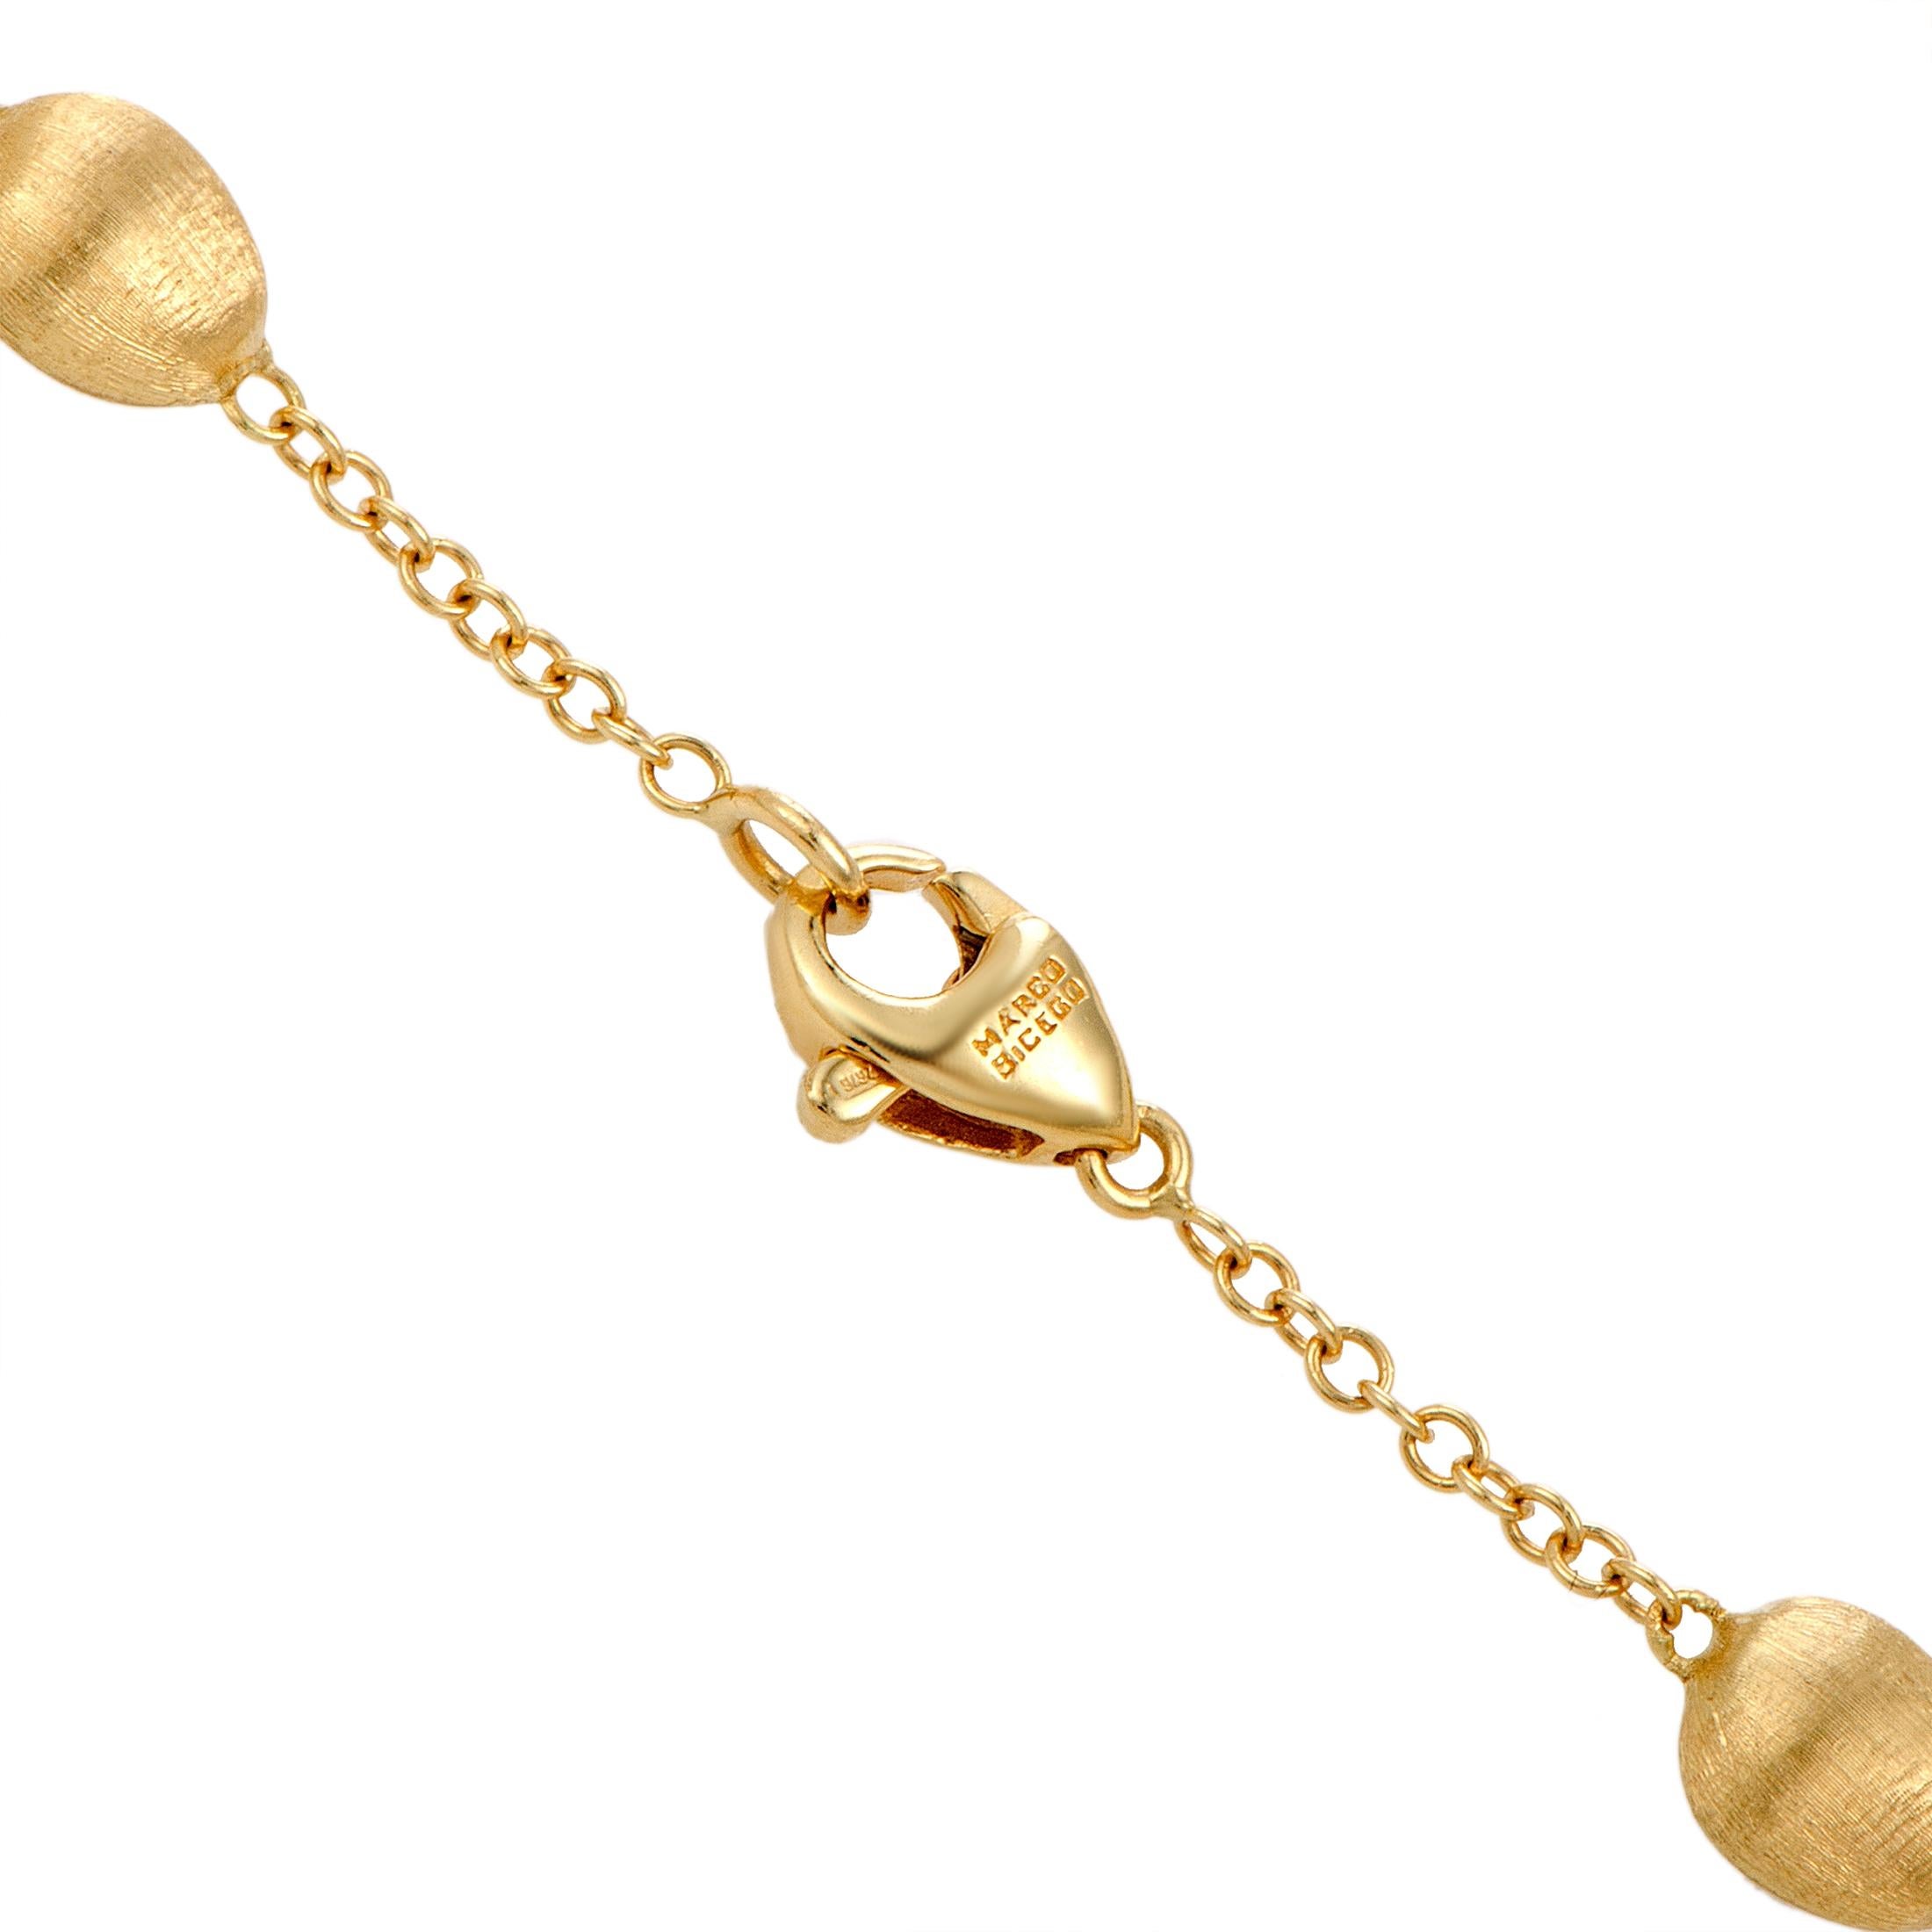 Women's Marco Bicego 18 Karat Yellow Gold and Multiple Gemstone Necklace